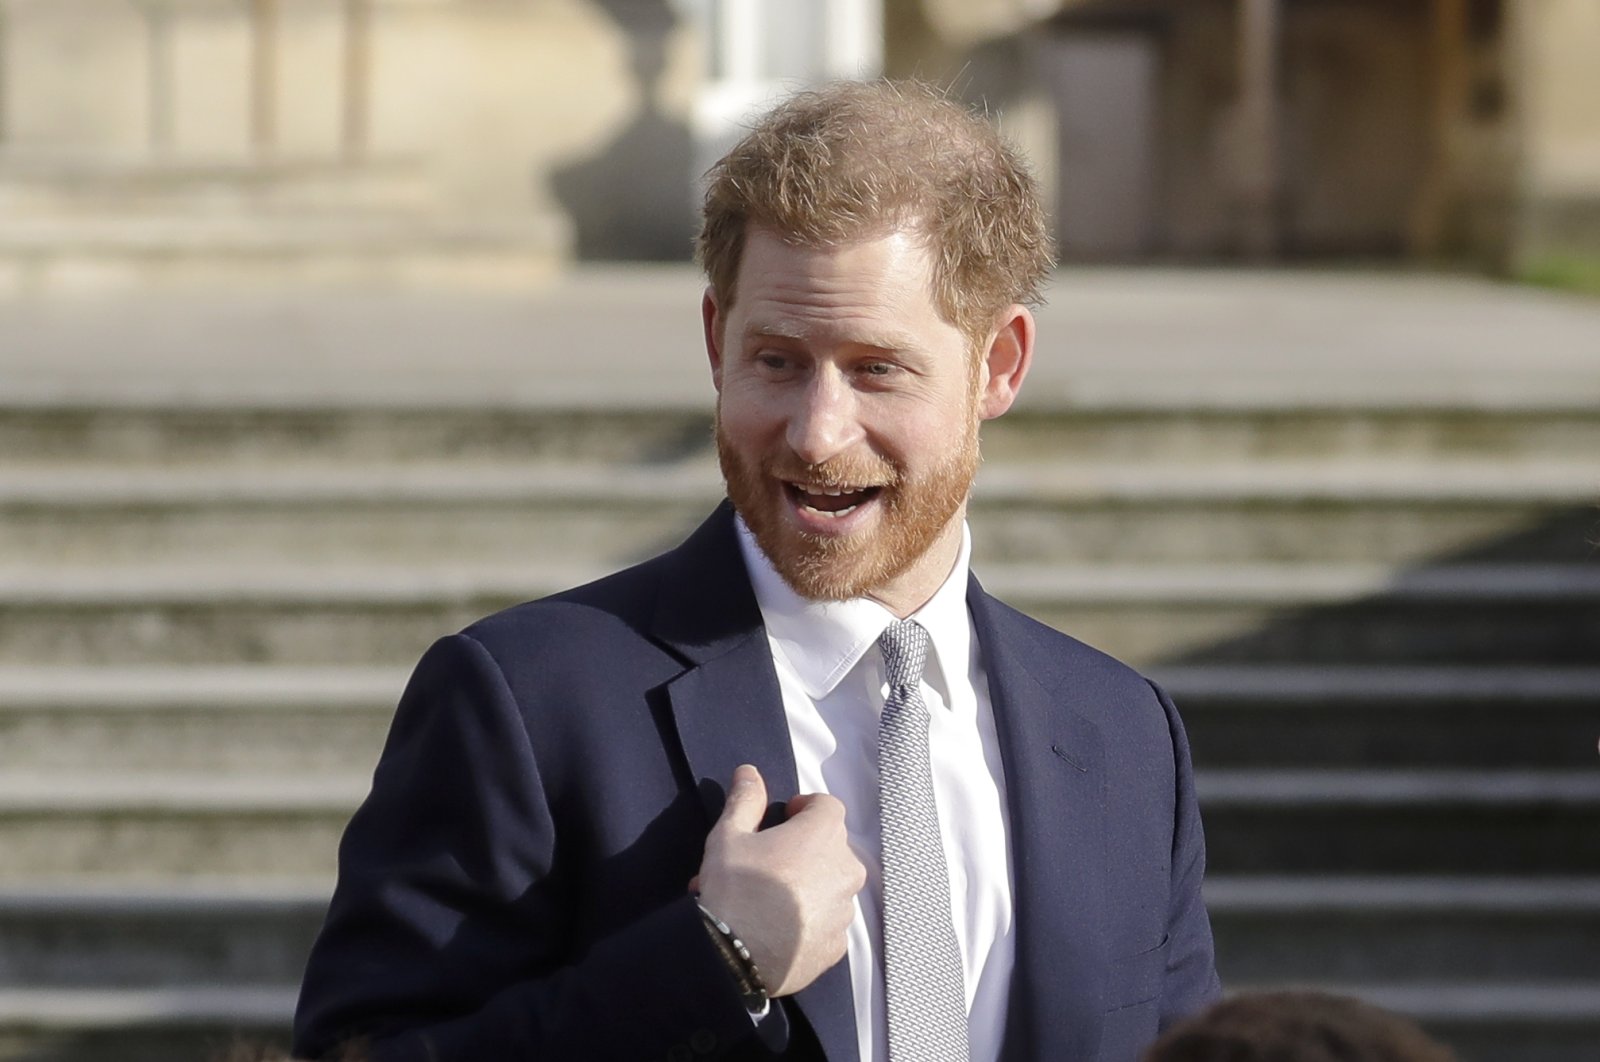 Britain's Prince Harry gestures in the gardens of Buckingham Palace in London, England, Jan. 16, 2020. (AP Photo)